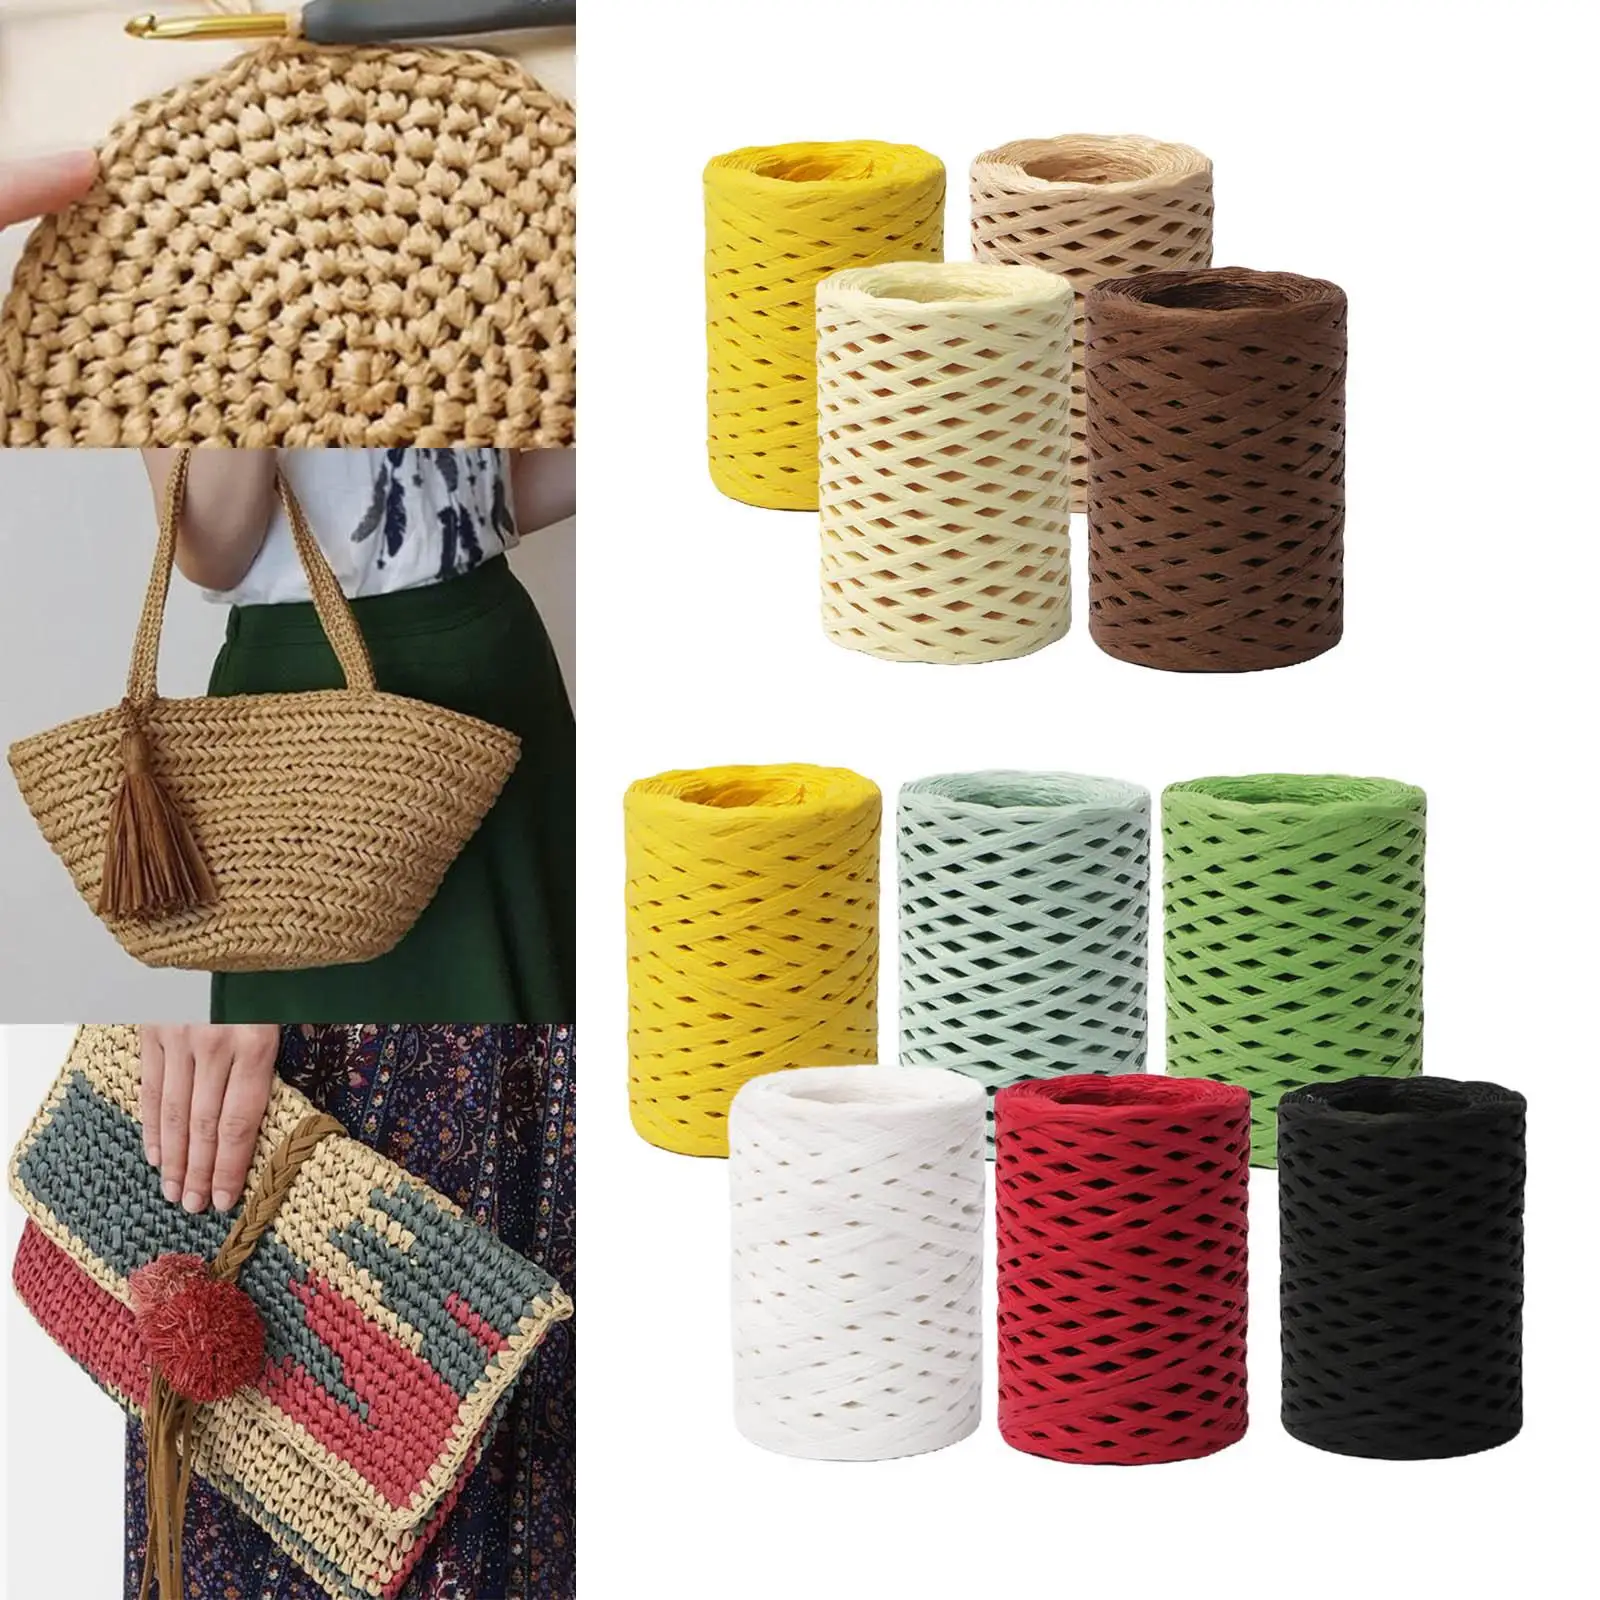 4/6rolls Raffia Paper Yarn Roll Natural Twine for Gift Wrapping Hanging Tags Festival DIY Craft Weaving Crocheting